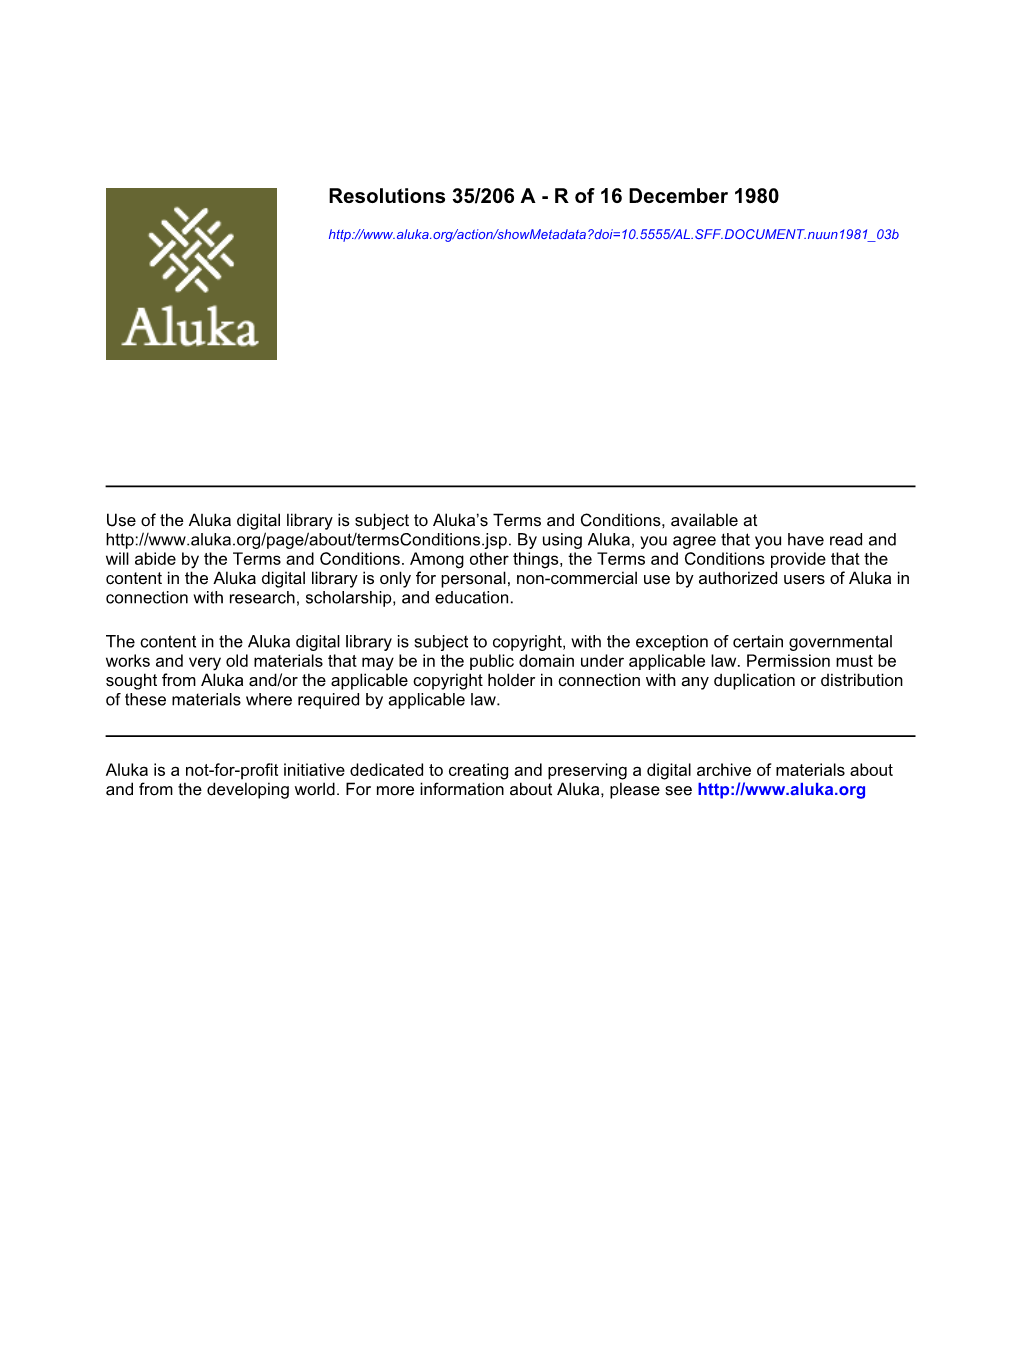 Resolutions 35/206 a - R of 16 December 1980